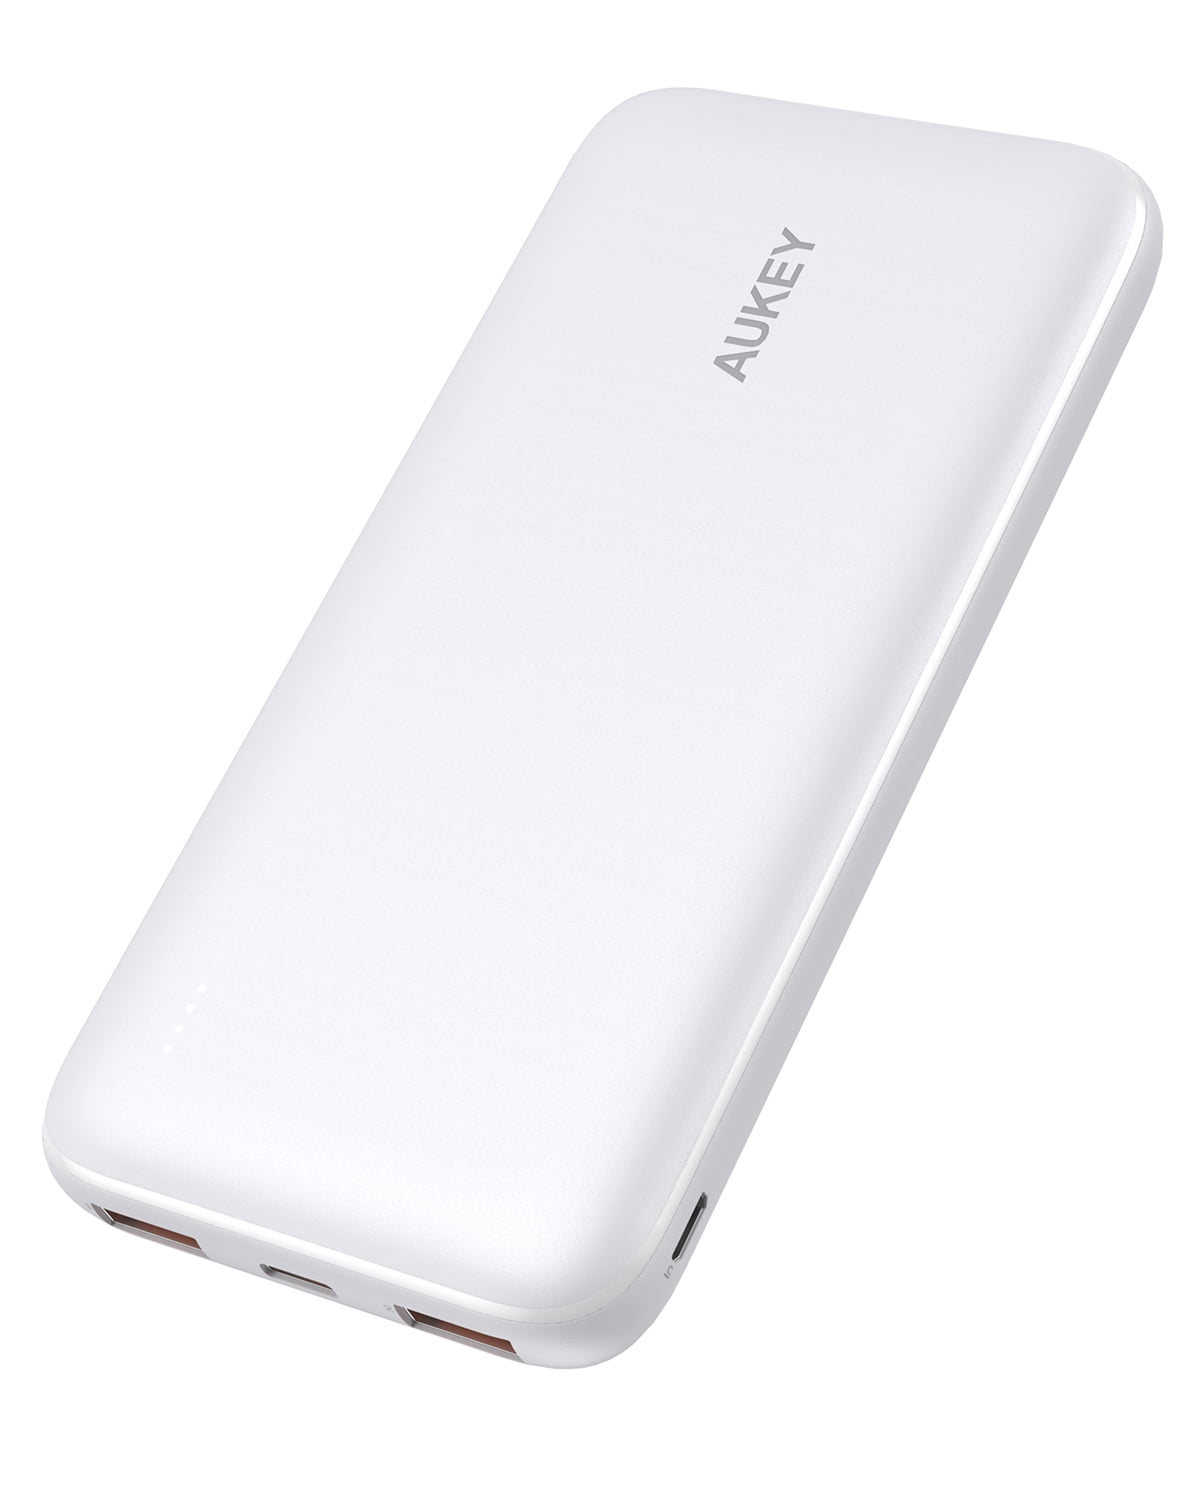 AUKEY Bank, USB C Charger 18W PD Fast Charging 10000mAh for Phones White - Walmart.com